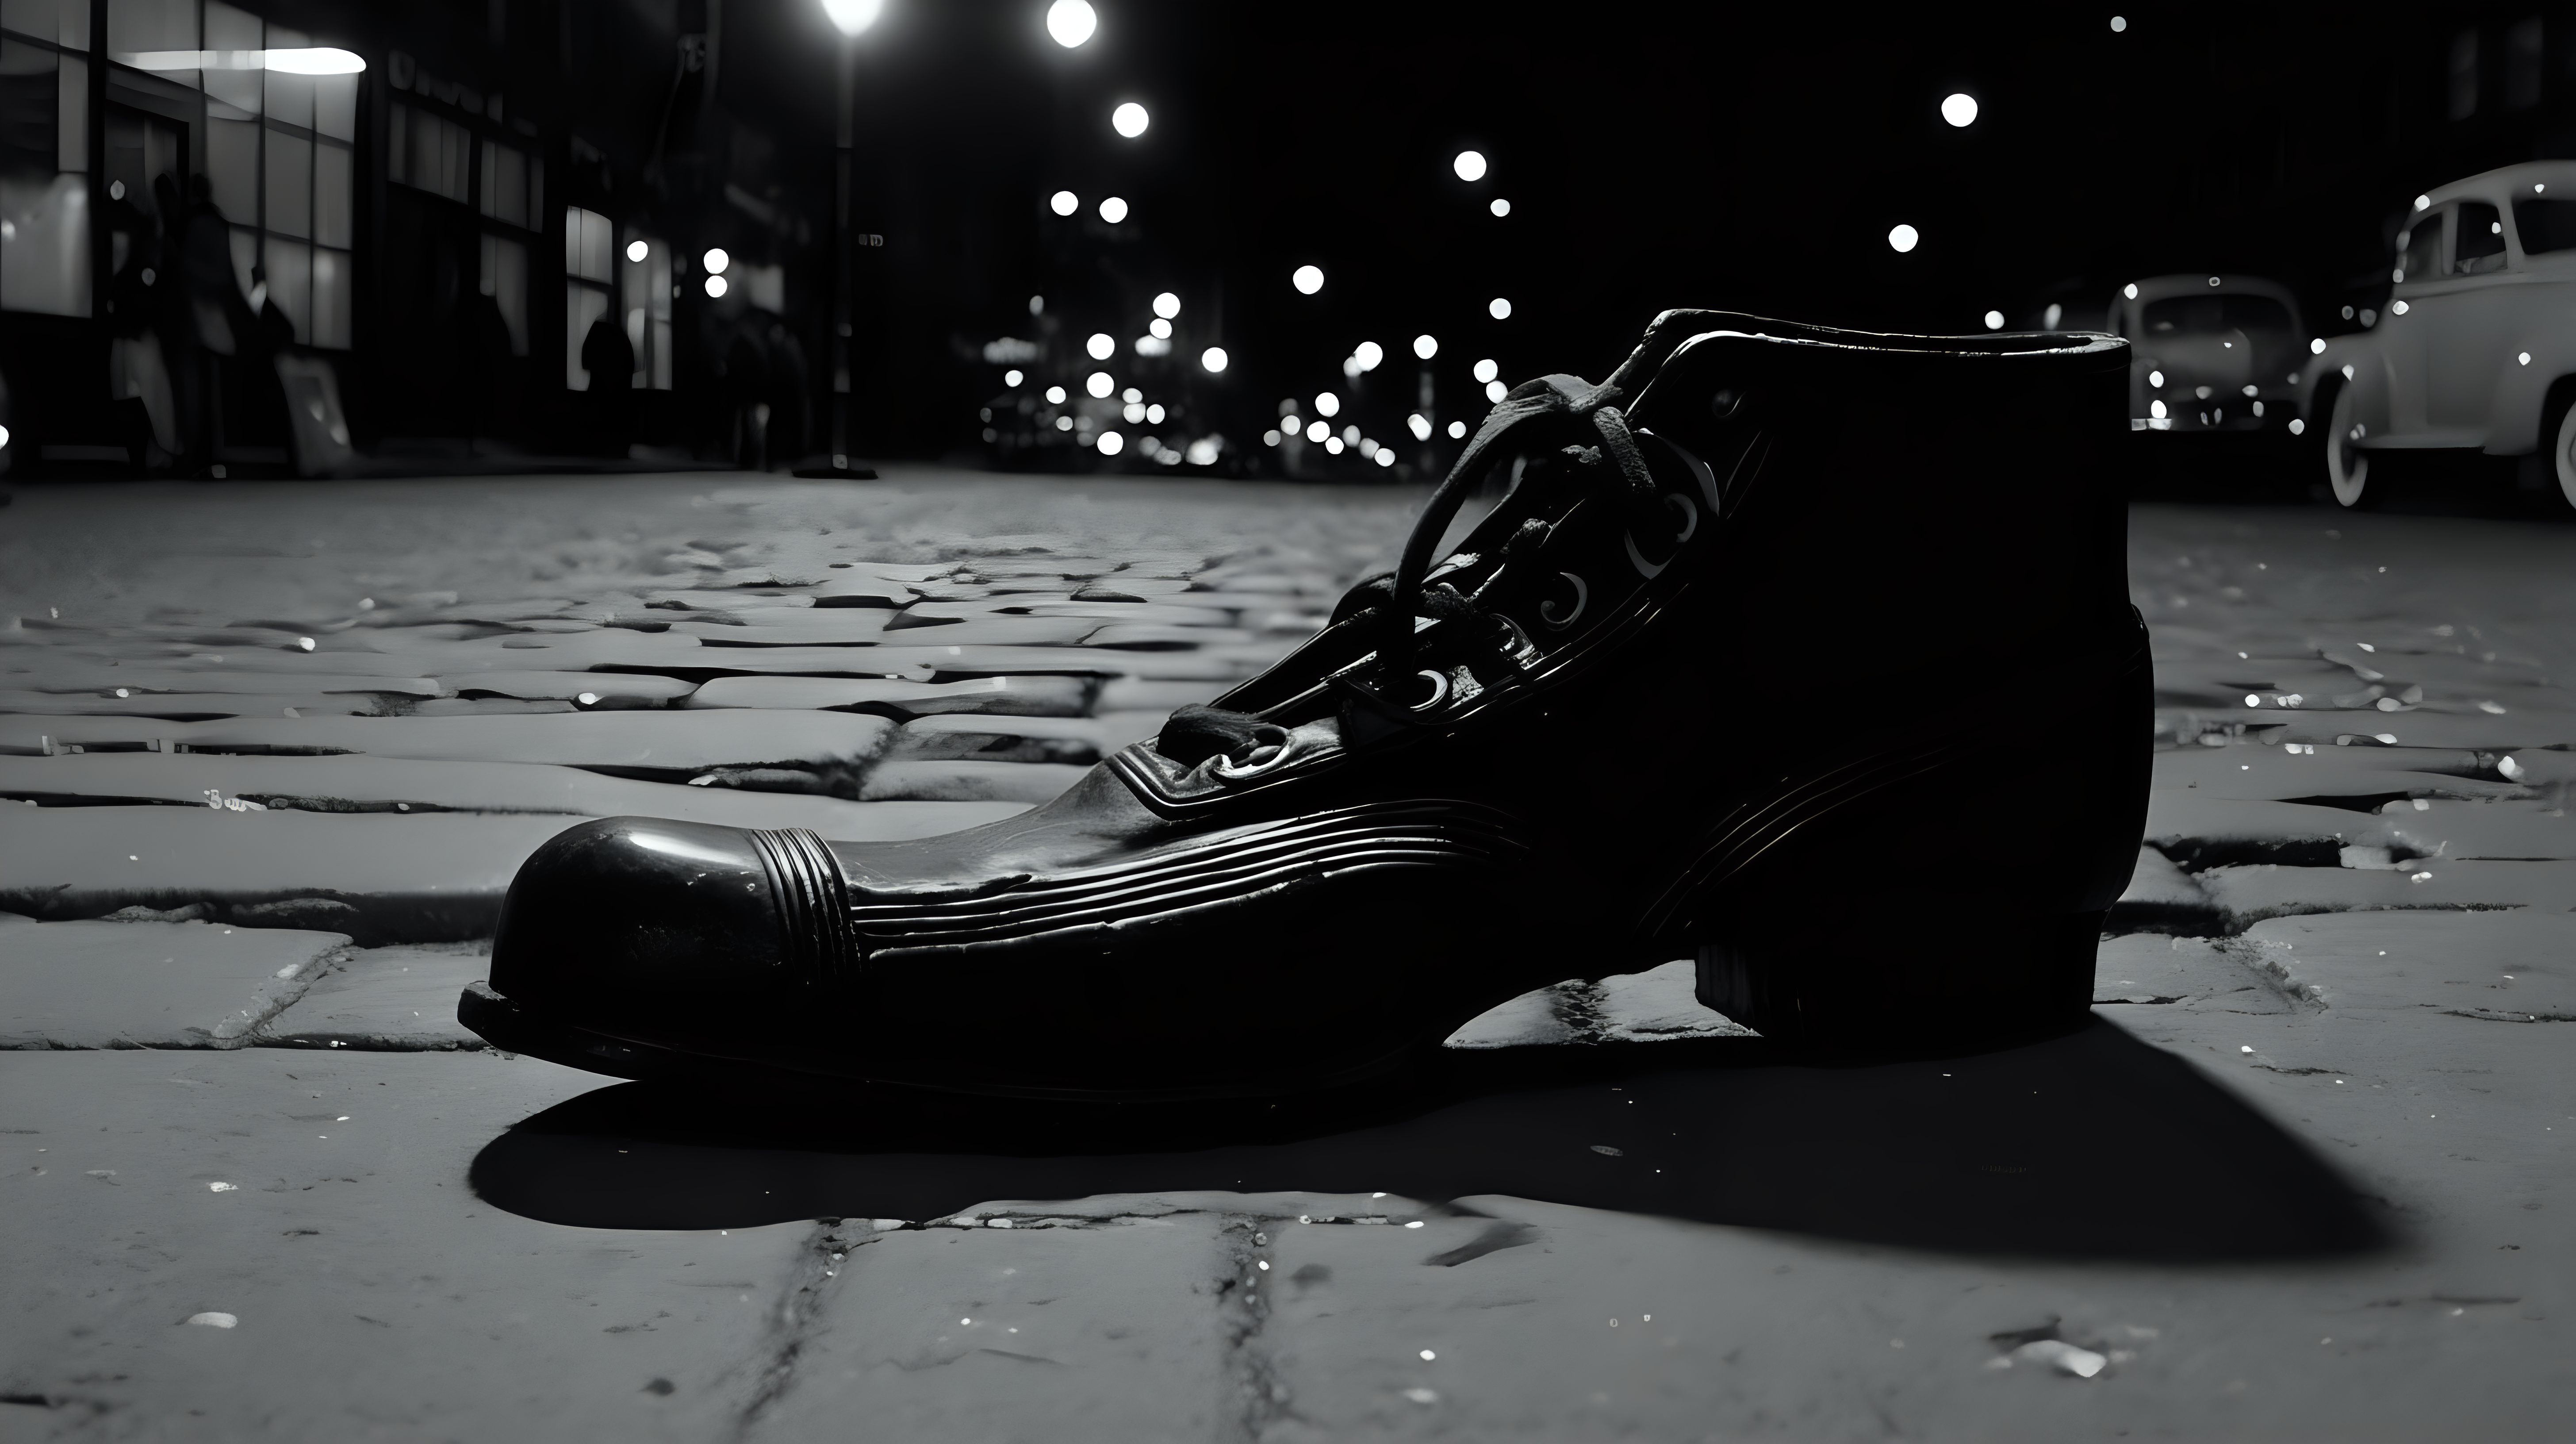 Big old black shoe placed on the pavement